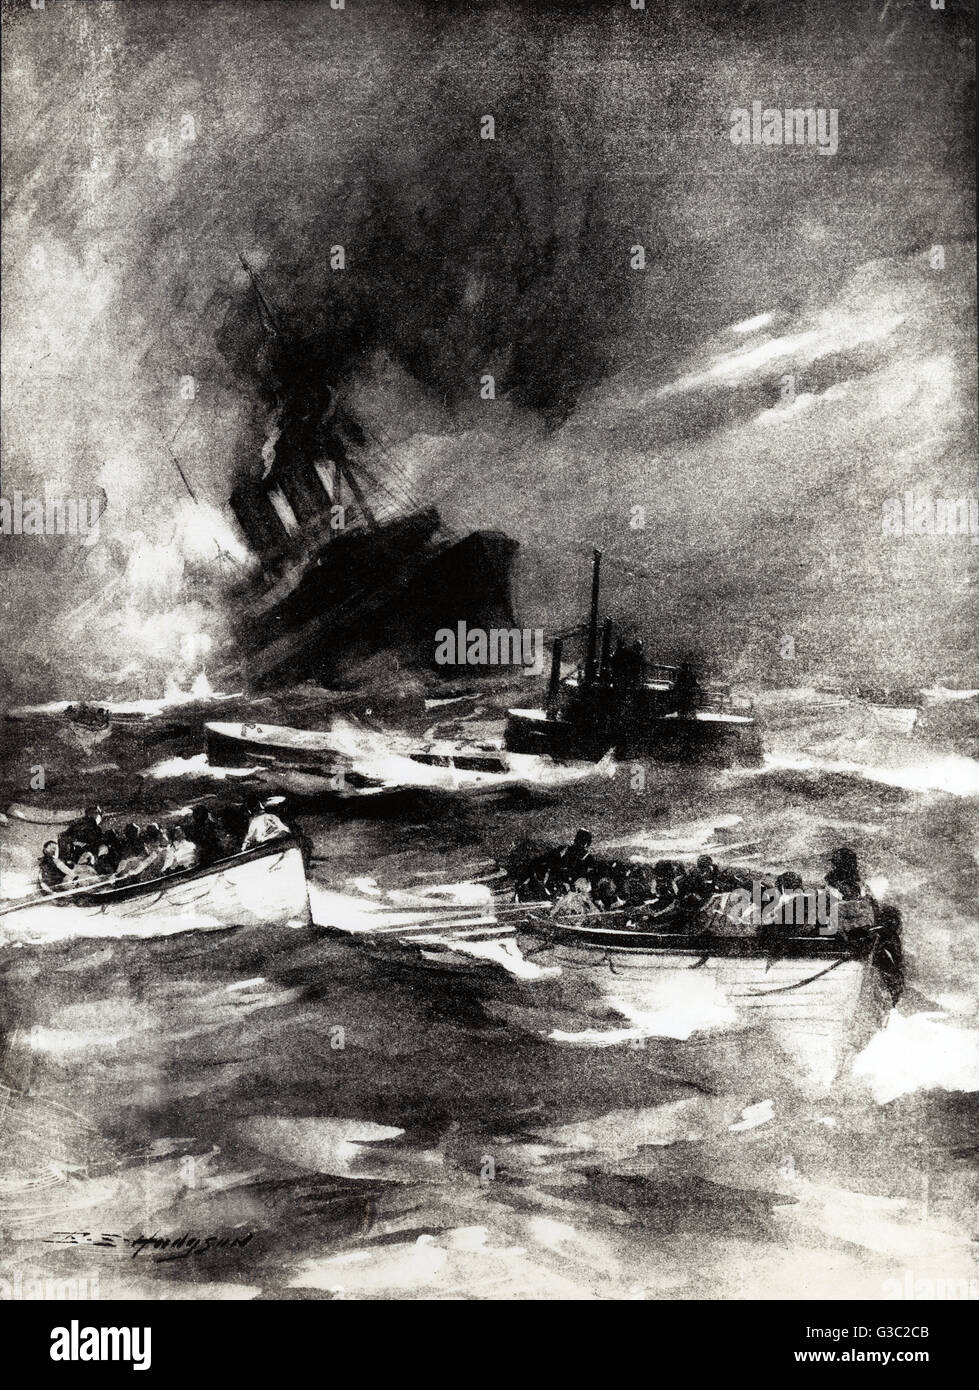 WW1 - RMS Laconia was a Cunard ocean liner torpedoed by SM U-50 while returning from the USA to England with passengers. The first torpedo struck the liner, but did not sink her. Twenty minutes later, a second torpedo exploded. Rescue boats with passenger Stock Photo